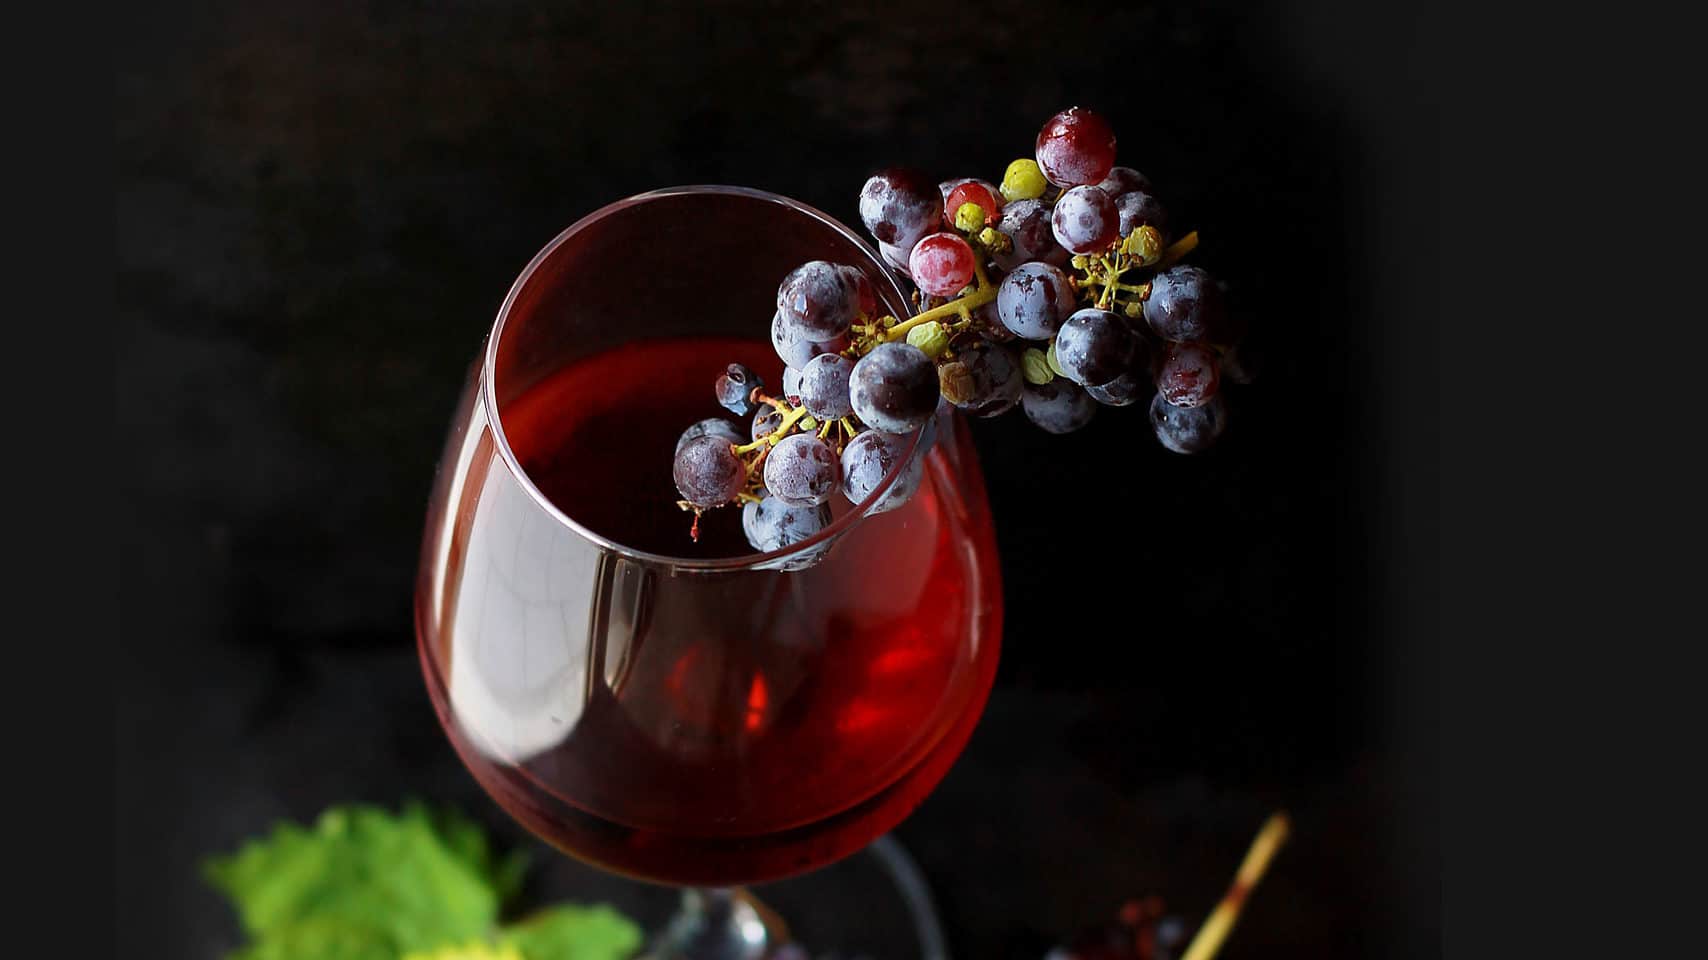 A glass of red wine elegantly accompanied by a cluster of grapes against a dark, witchy background.